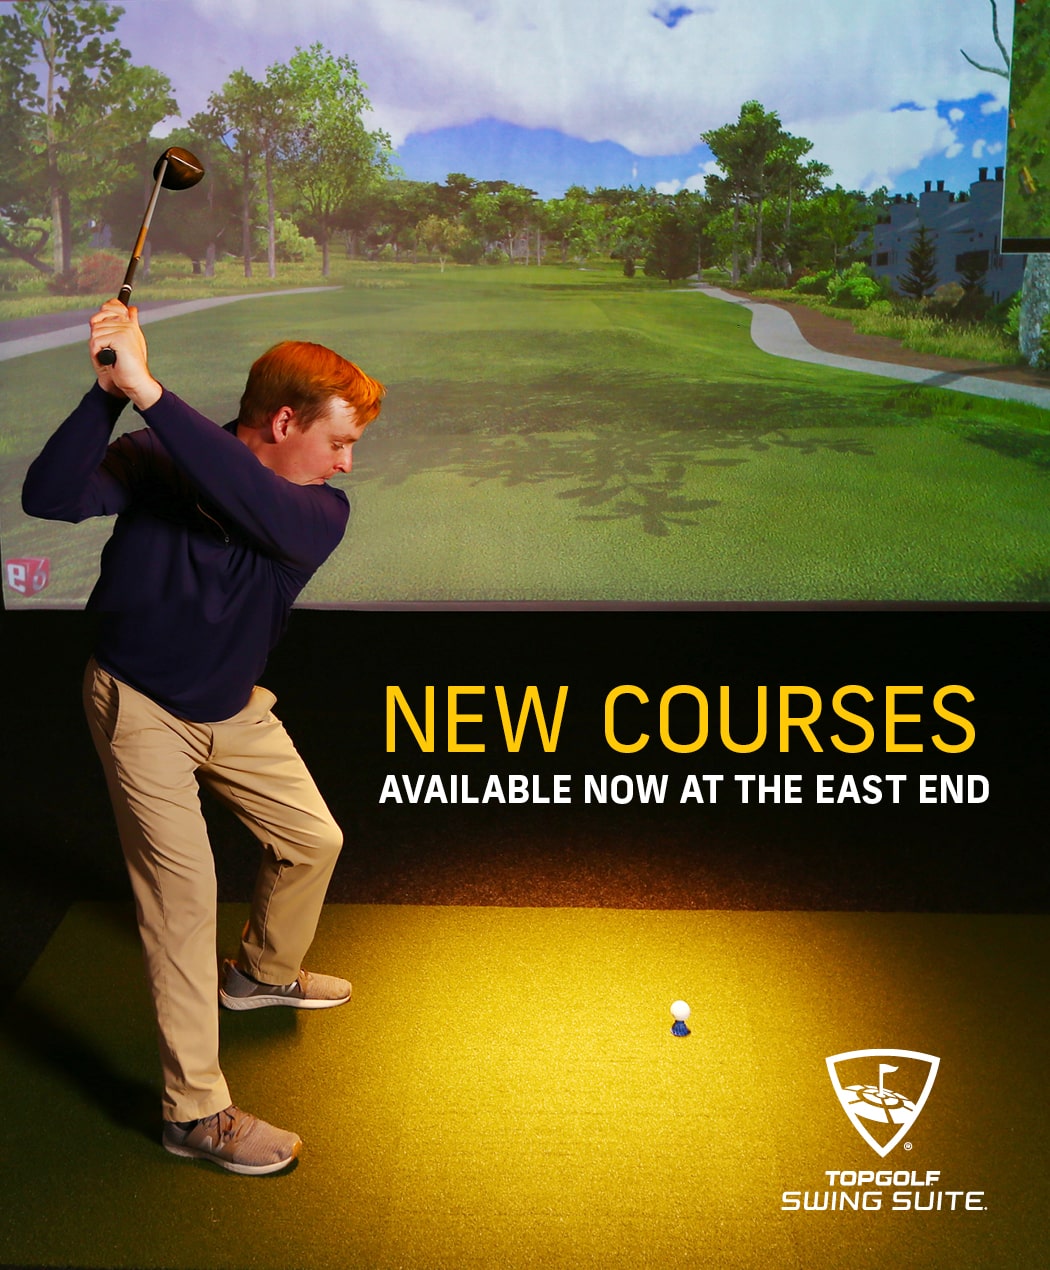 New Courses available now at the East End